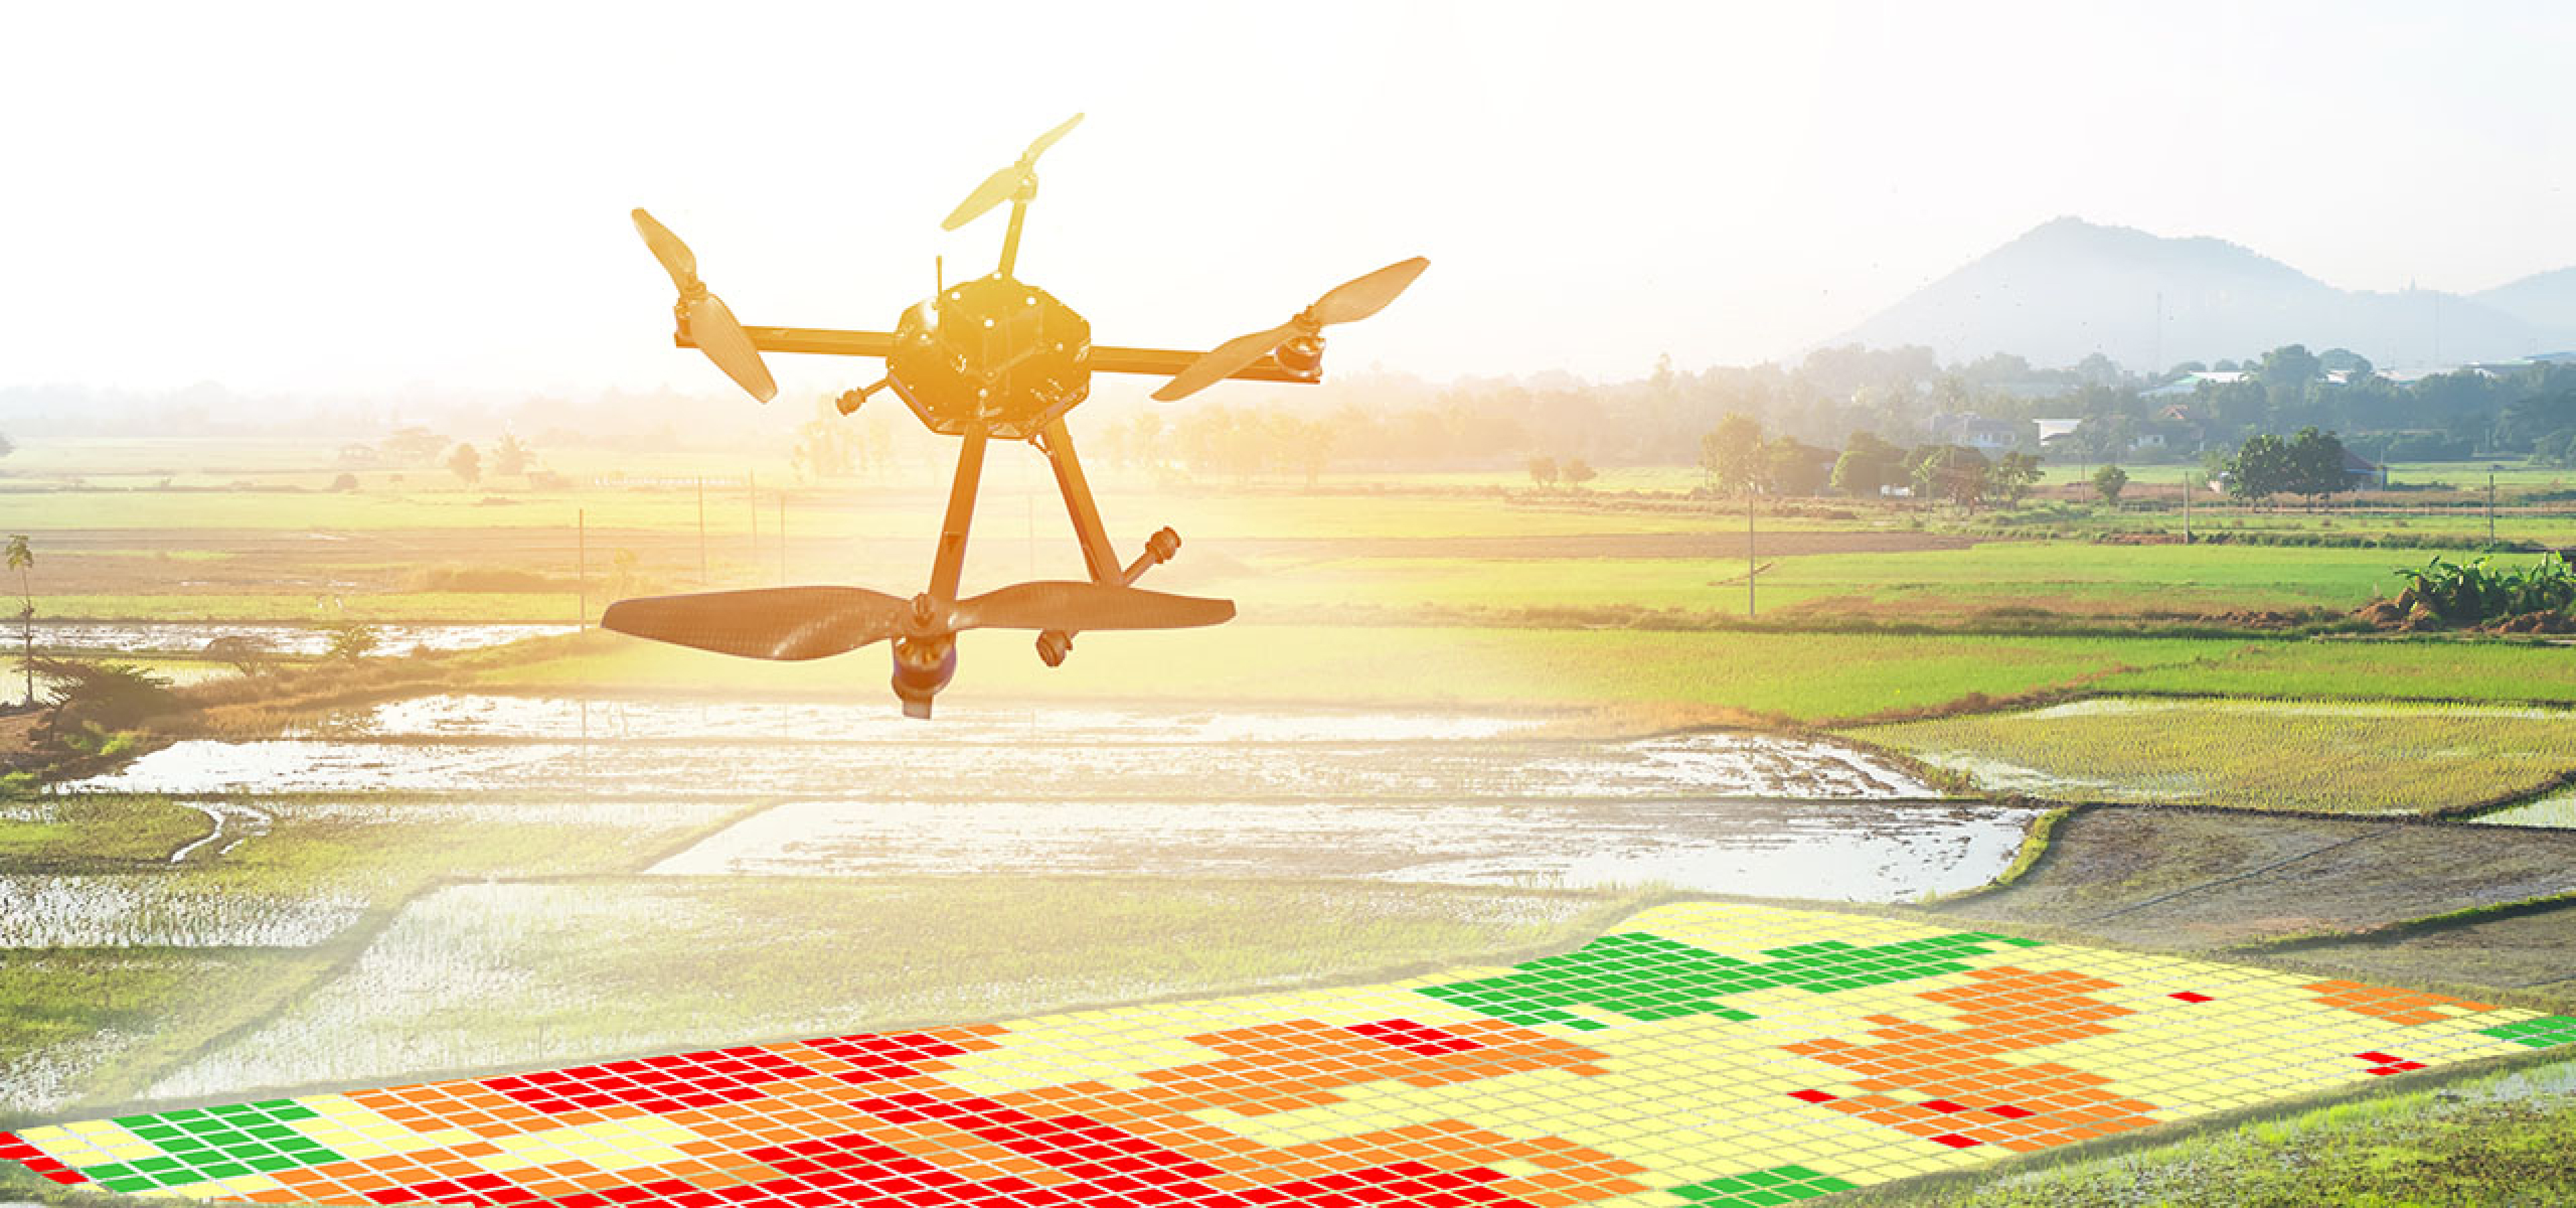 A drone flying over farmland with overlaid square highlights of green, yellow, and red